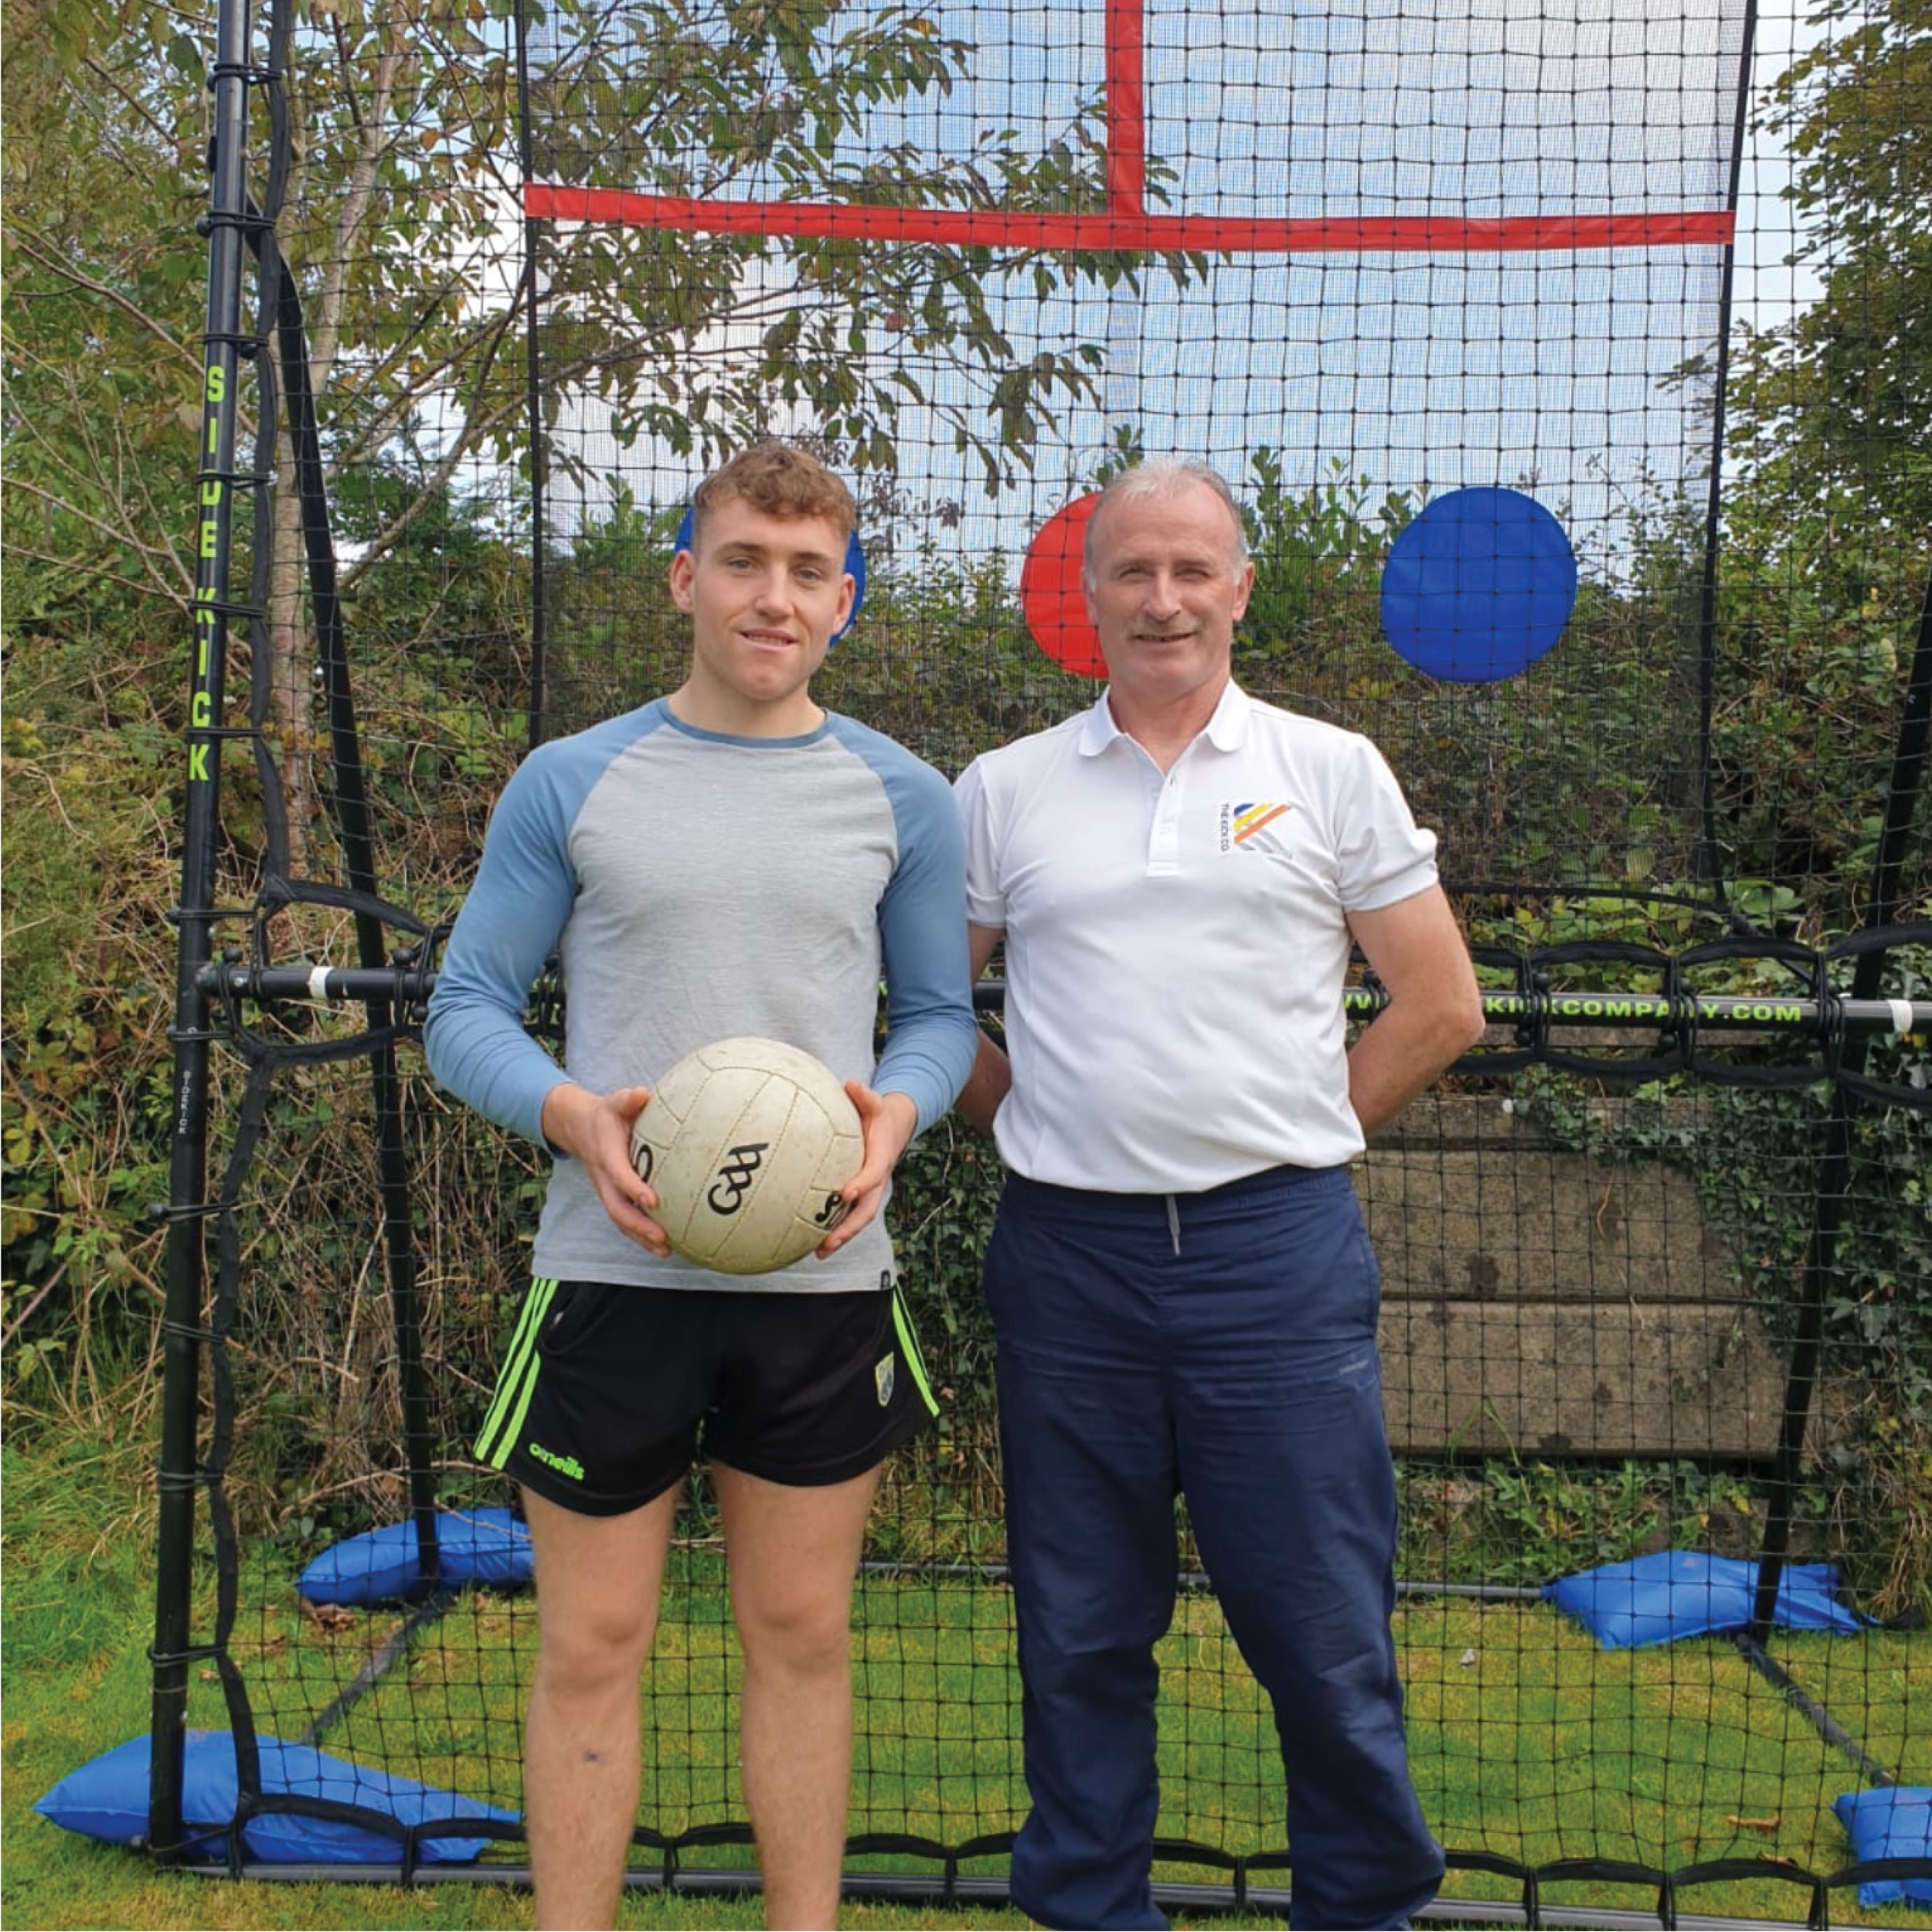 Daragh Moynihan, Kerry Footballer, with Gerry McElligott, Co - Founder of The Kick Co. standing in front of The SkillMaster.